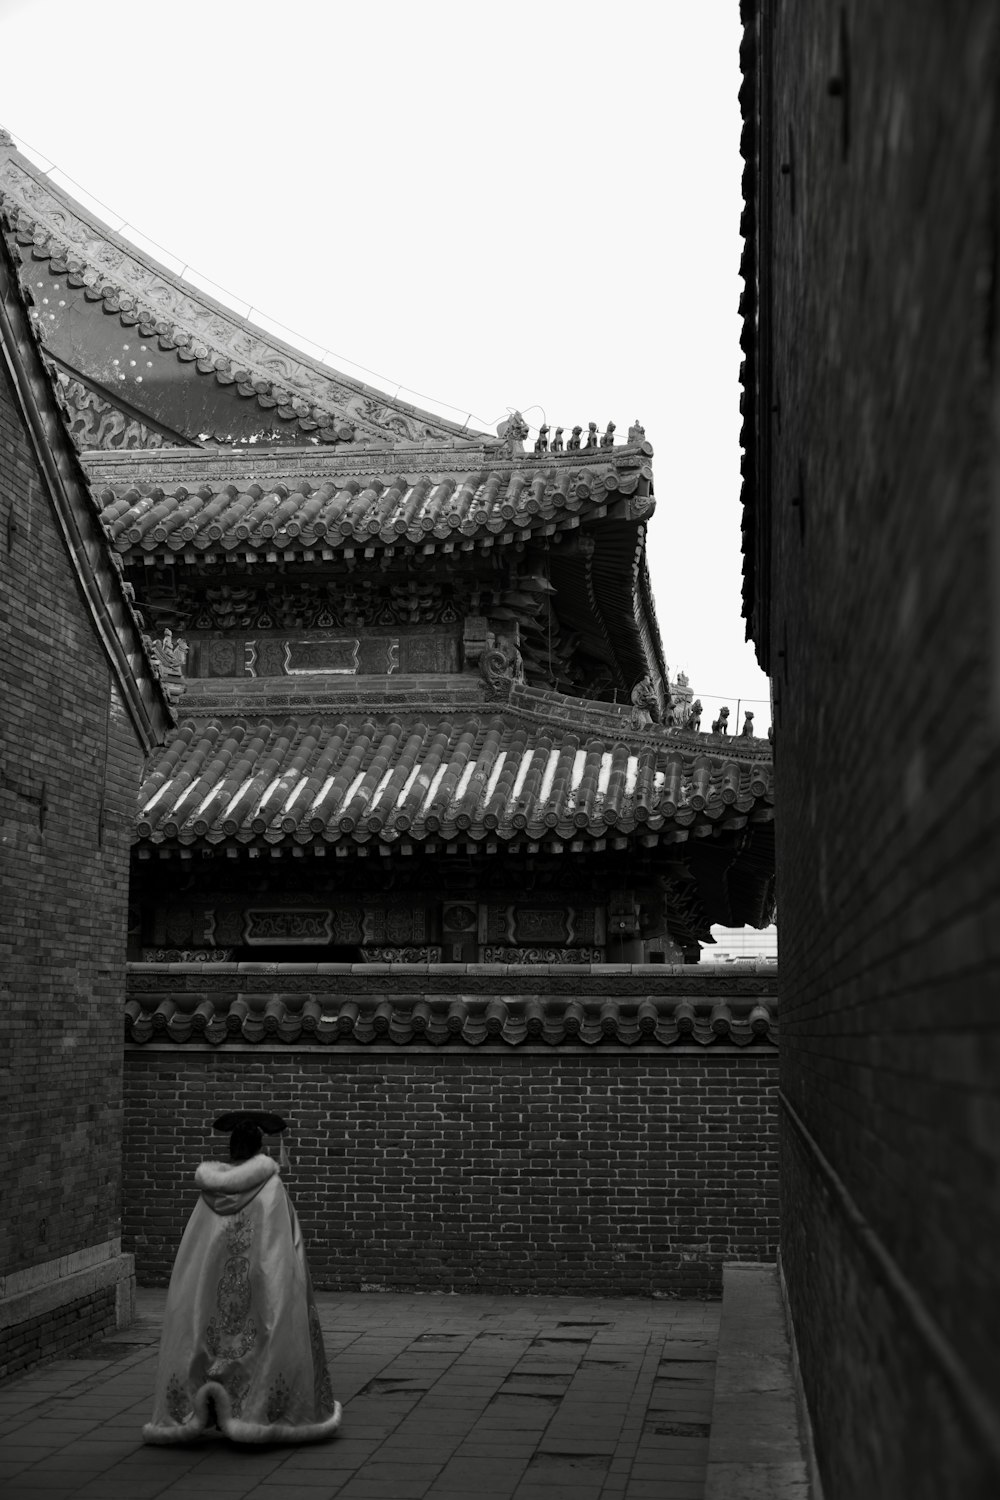 a black and white photo of a chinese building